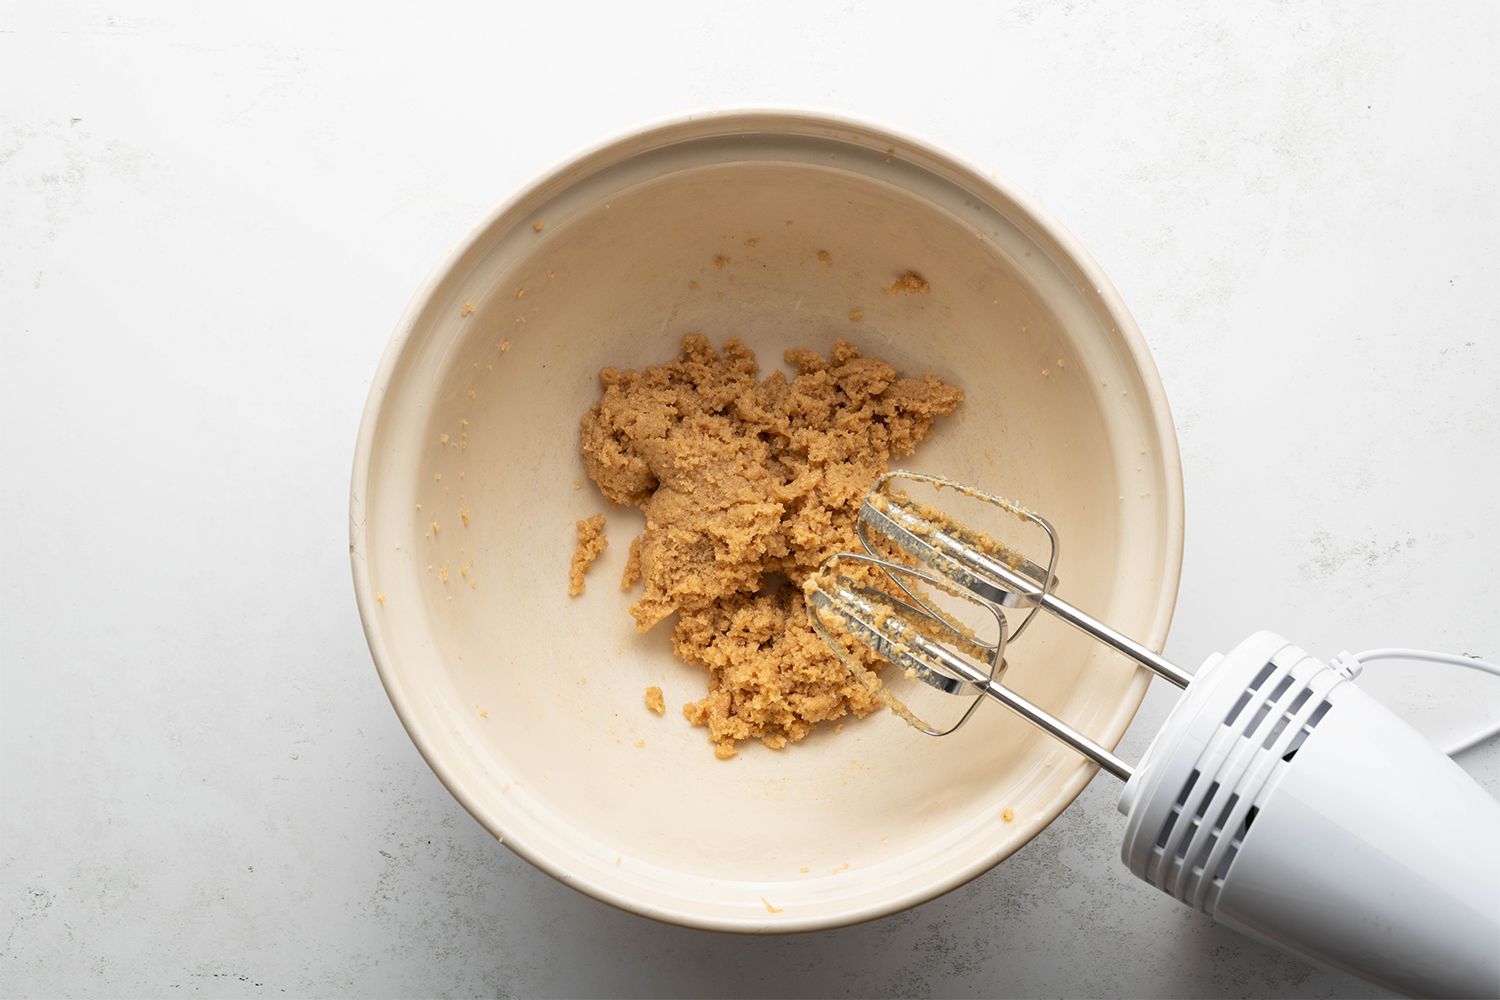 Peanut butter and sugar mixture in a bowl, next to a hand mixer 